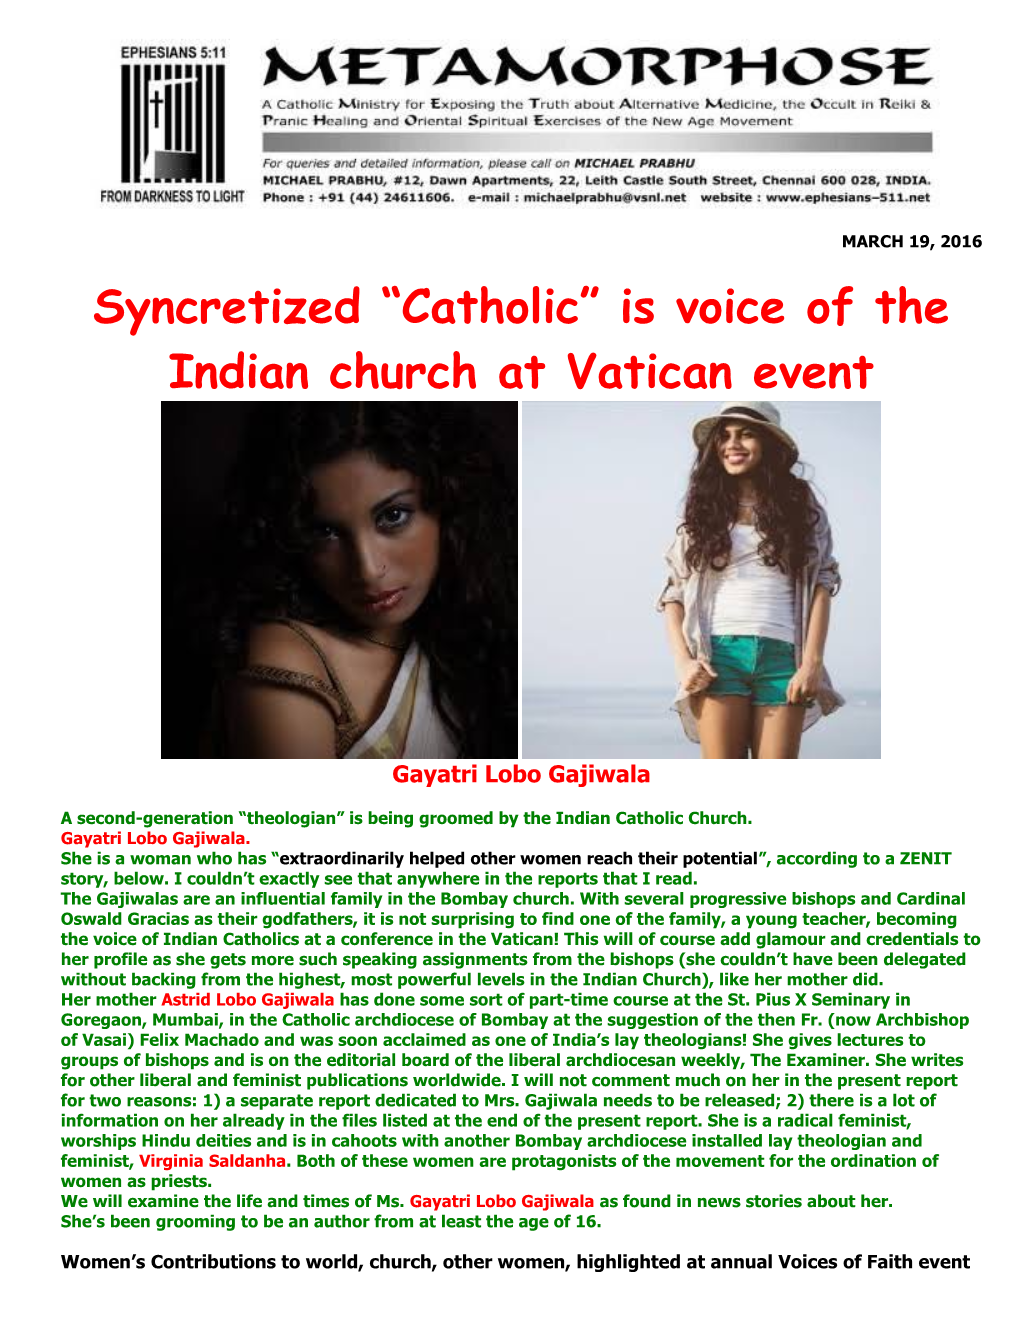 Syncretized Catholic Is Voice of the Indian Church at Vatican Event